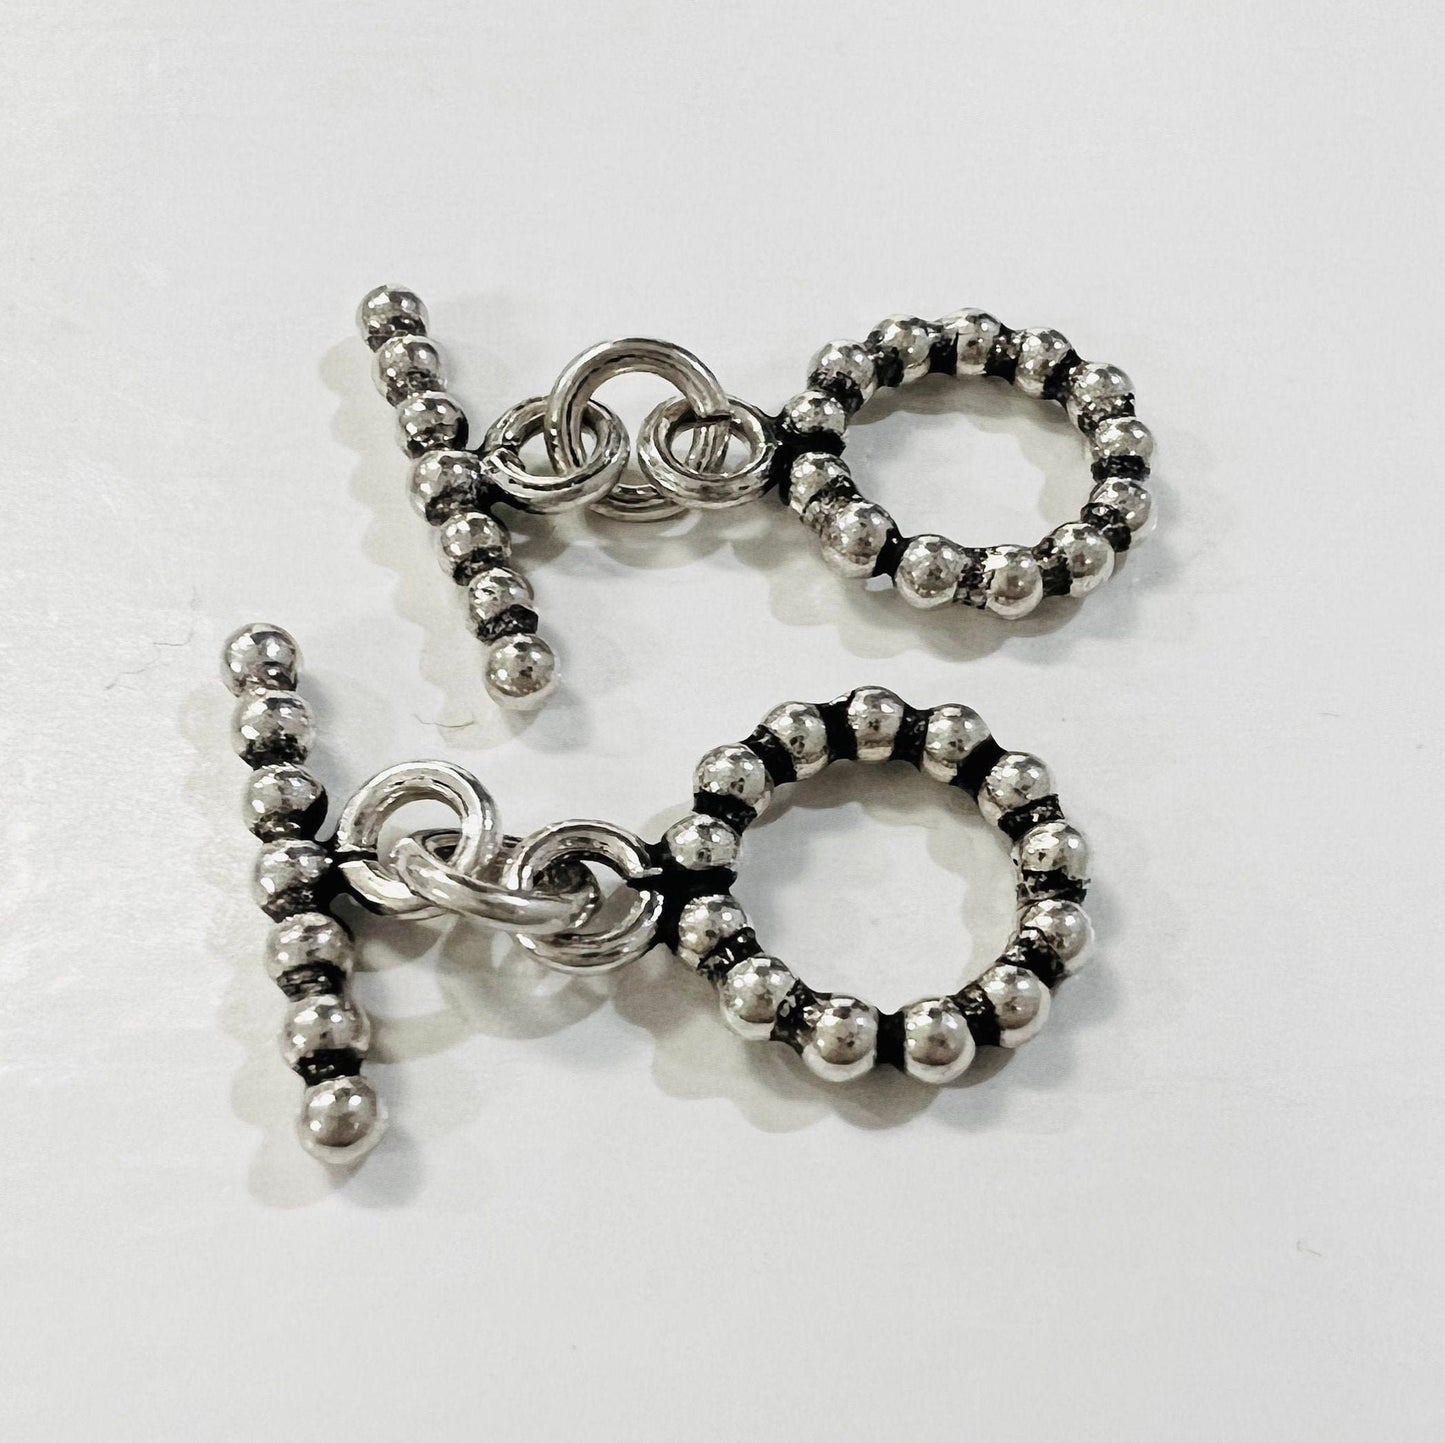 2 sets 925 sterling silver Bali 10.5mm round dots small toggle clasp. Vintage Handmade antique finished Bali toggle for Jewelry making .